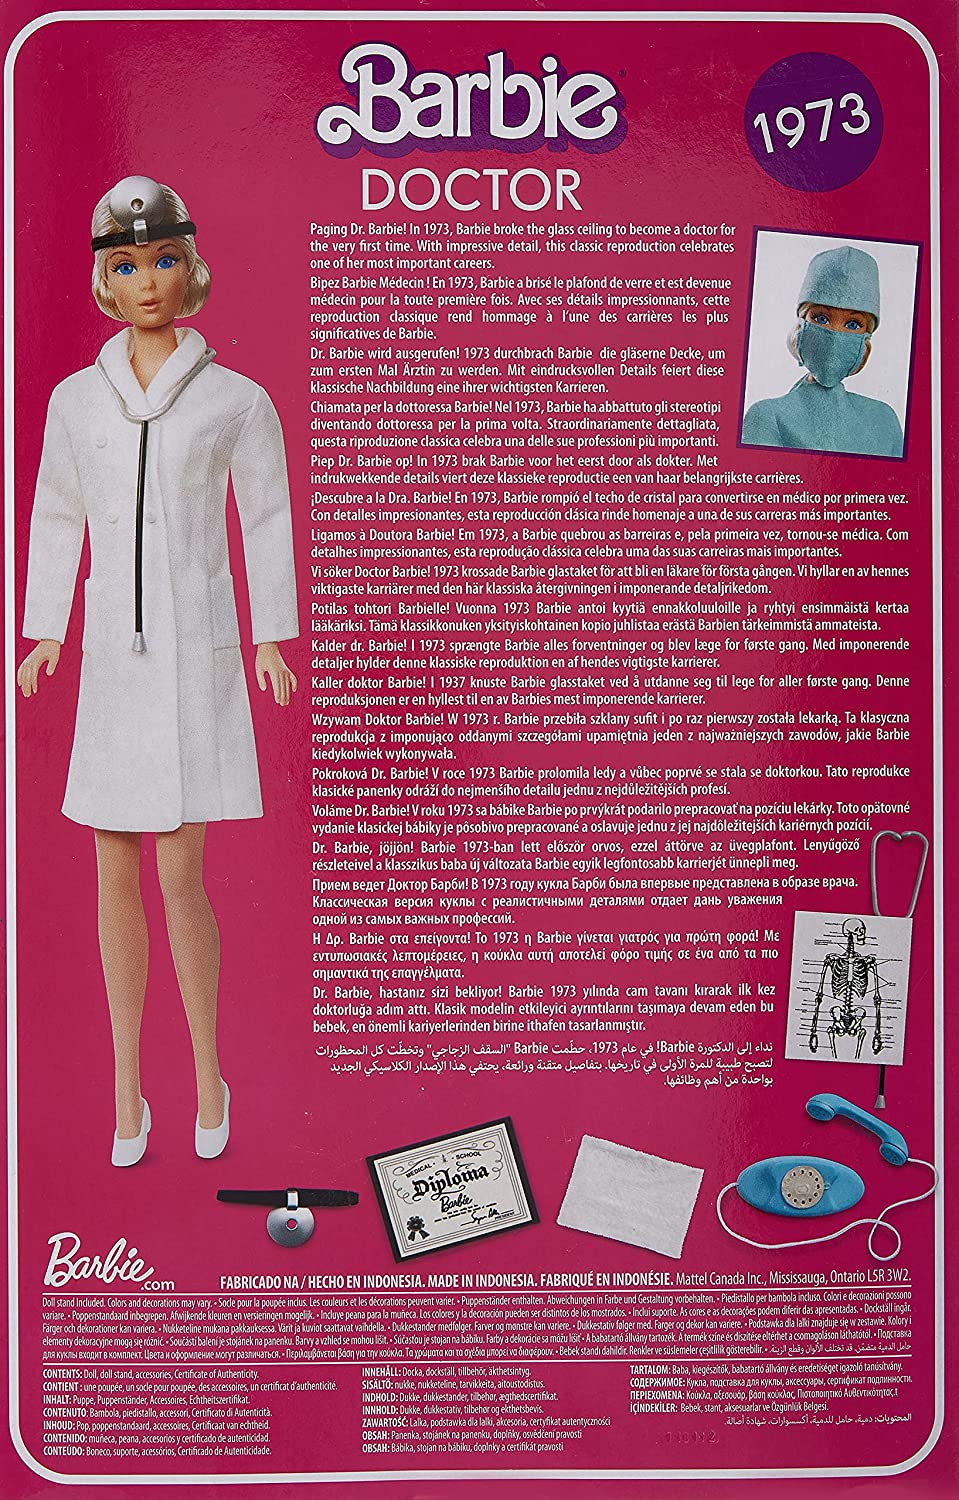 Losjes Verstikkend Ithaca Barbie Signature Doctor 1973 doll reproduction - YouLoveIt.com